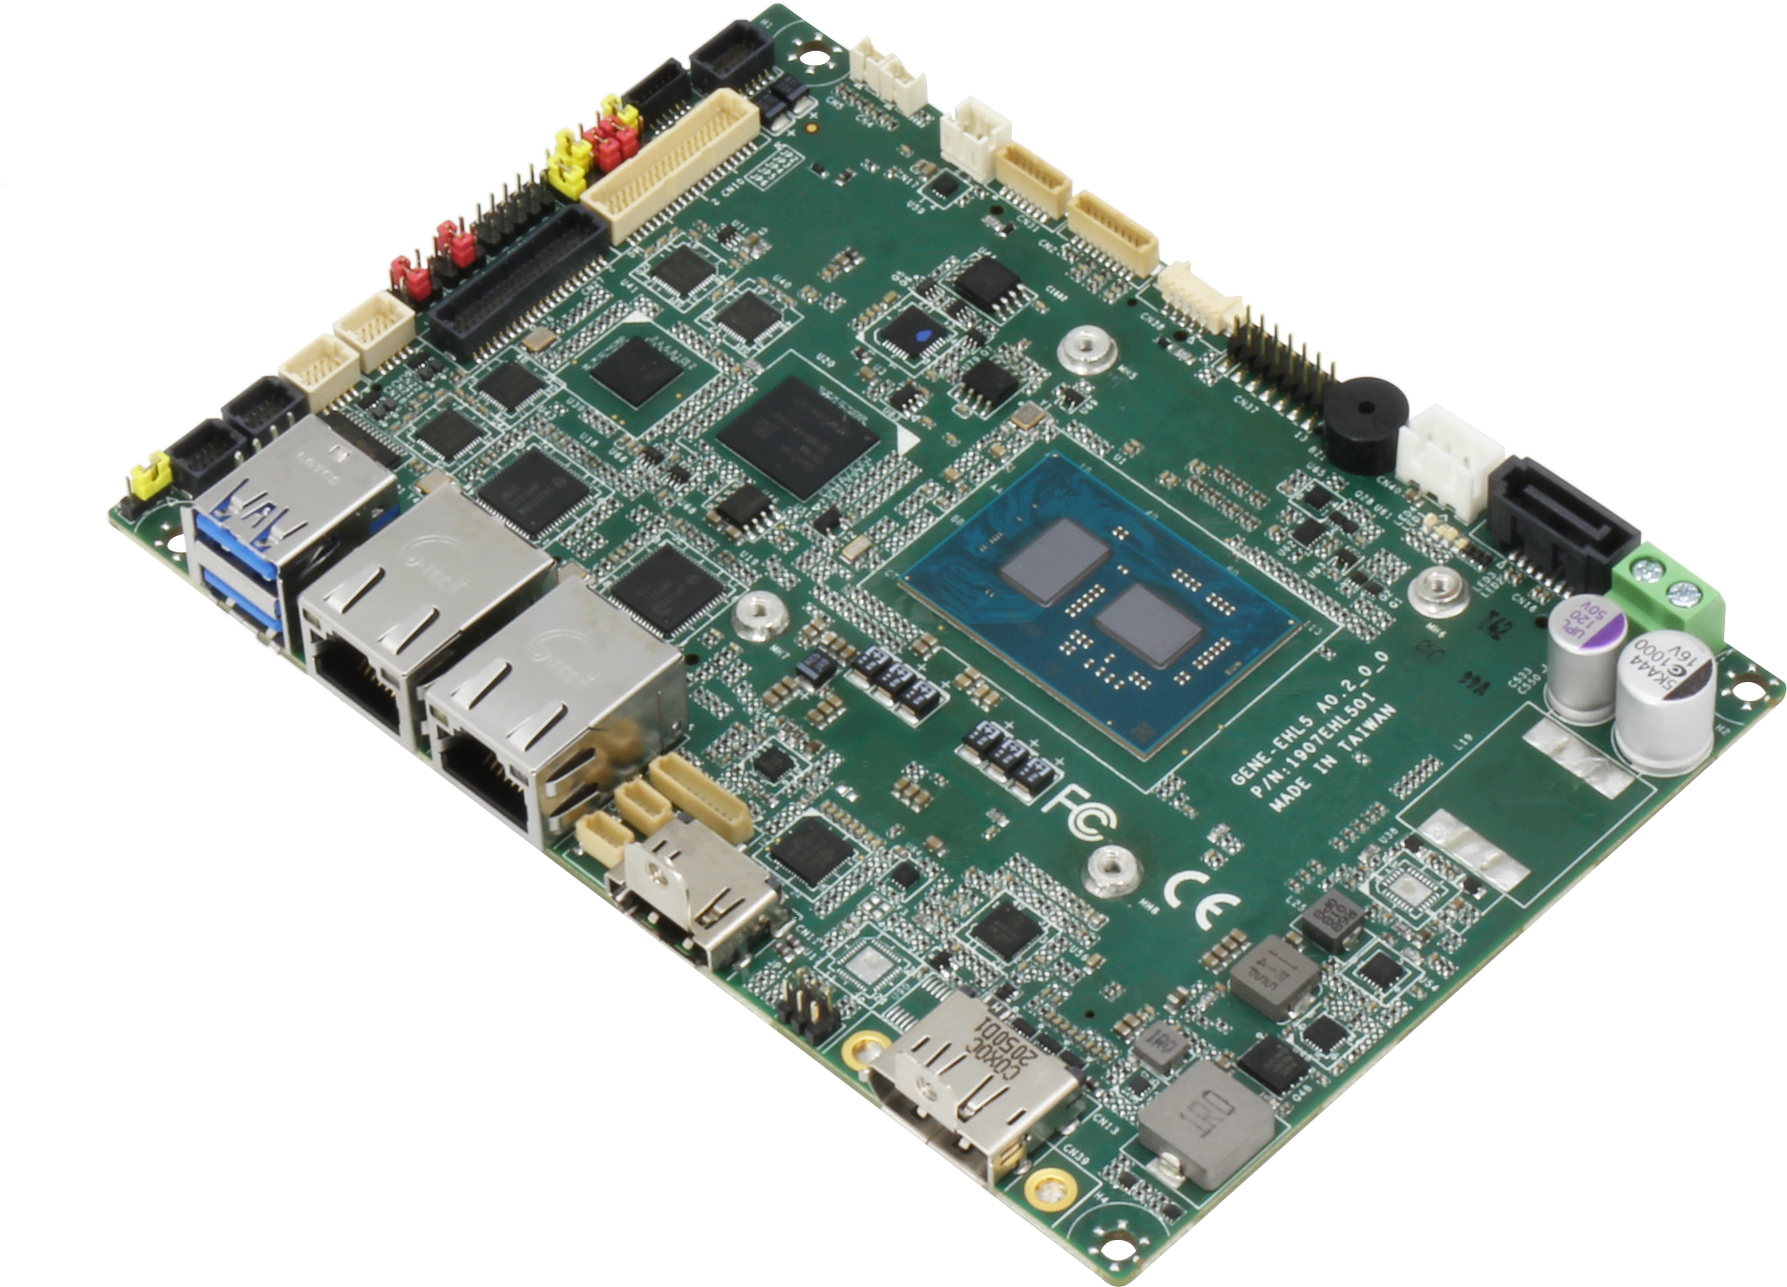 AAEON Introduces GENE-EHL5, a newly added 3.5” Subcompact Board Powered by Intel® Atom™ x6000E Series